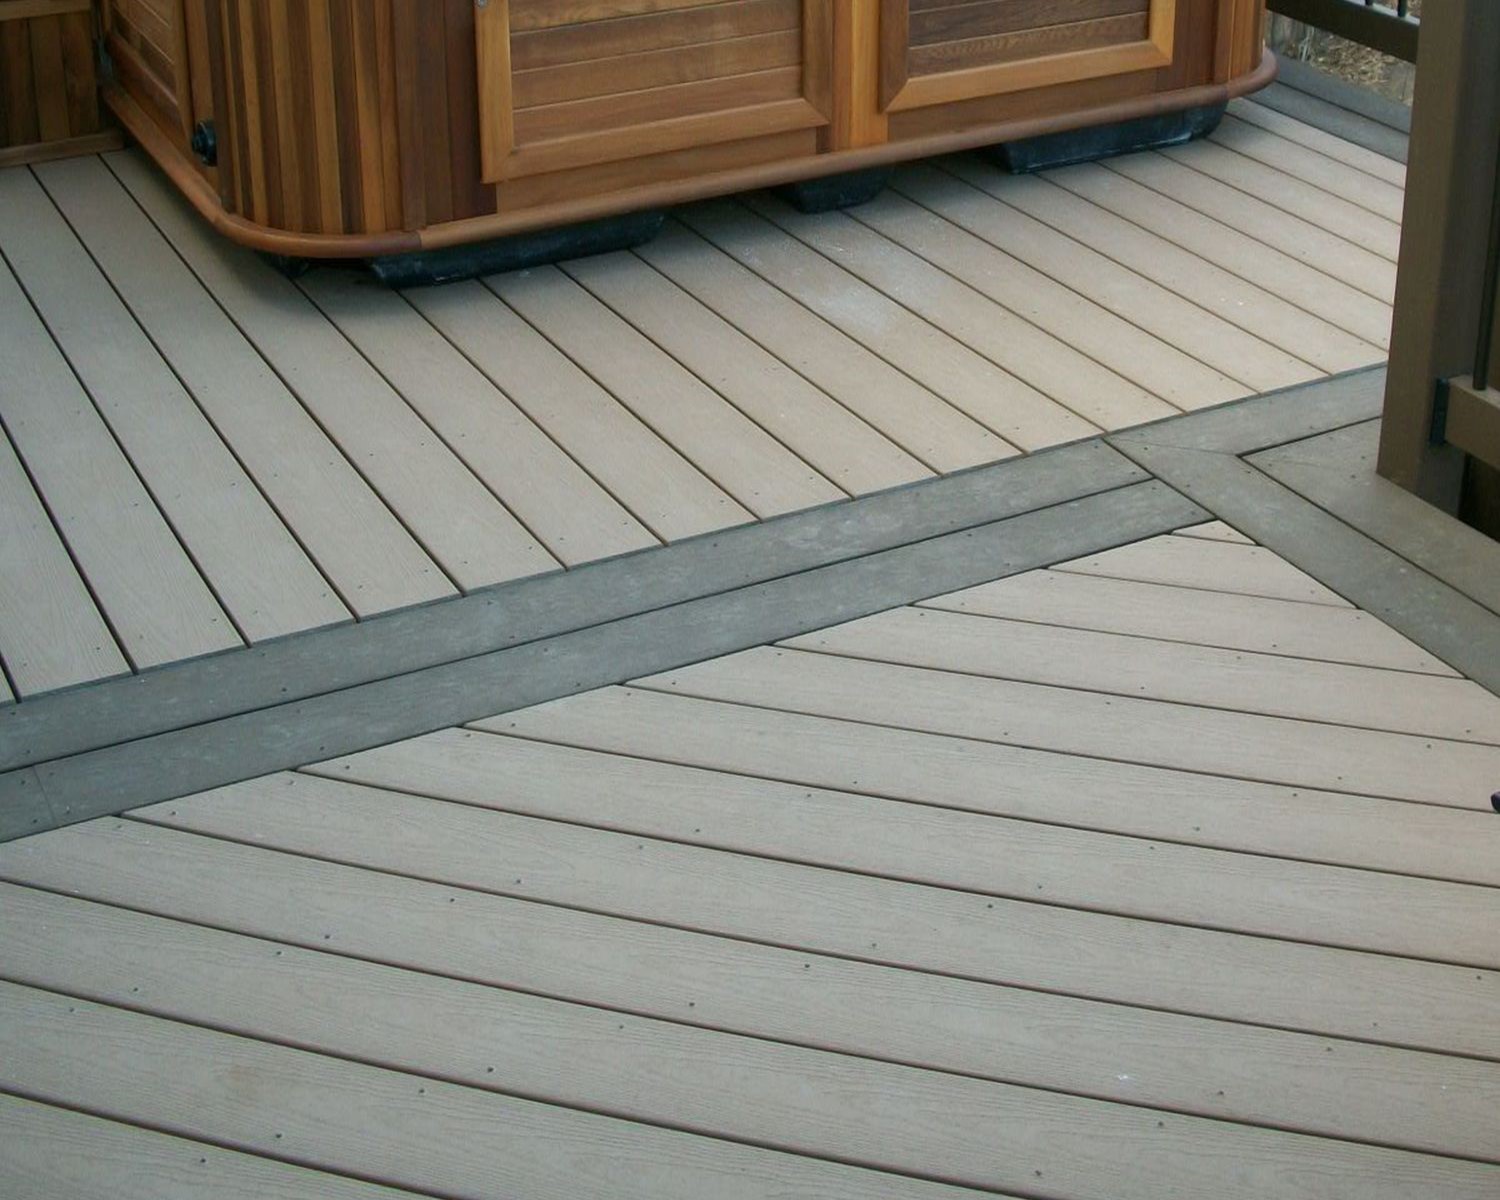 This composite deck is laid out in multiple angles with the double divider boards and picture frame border in a contrasting color.